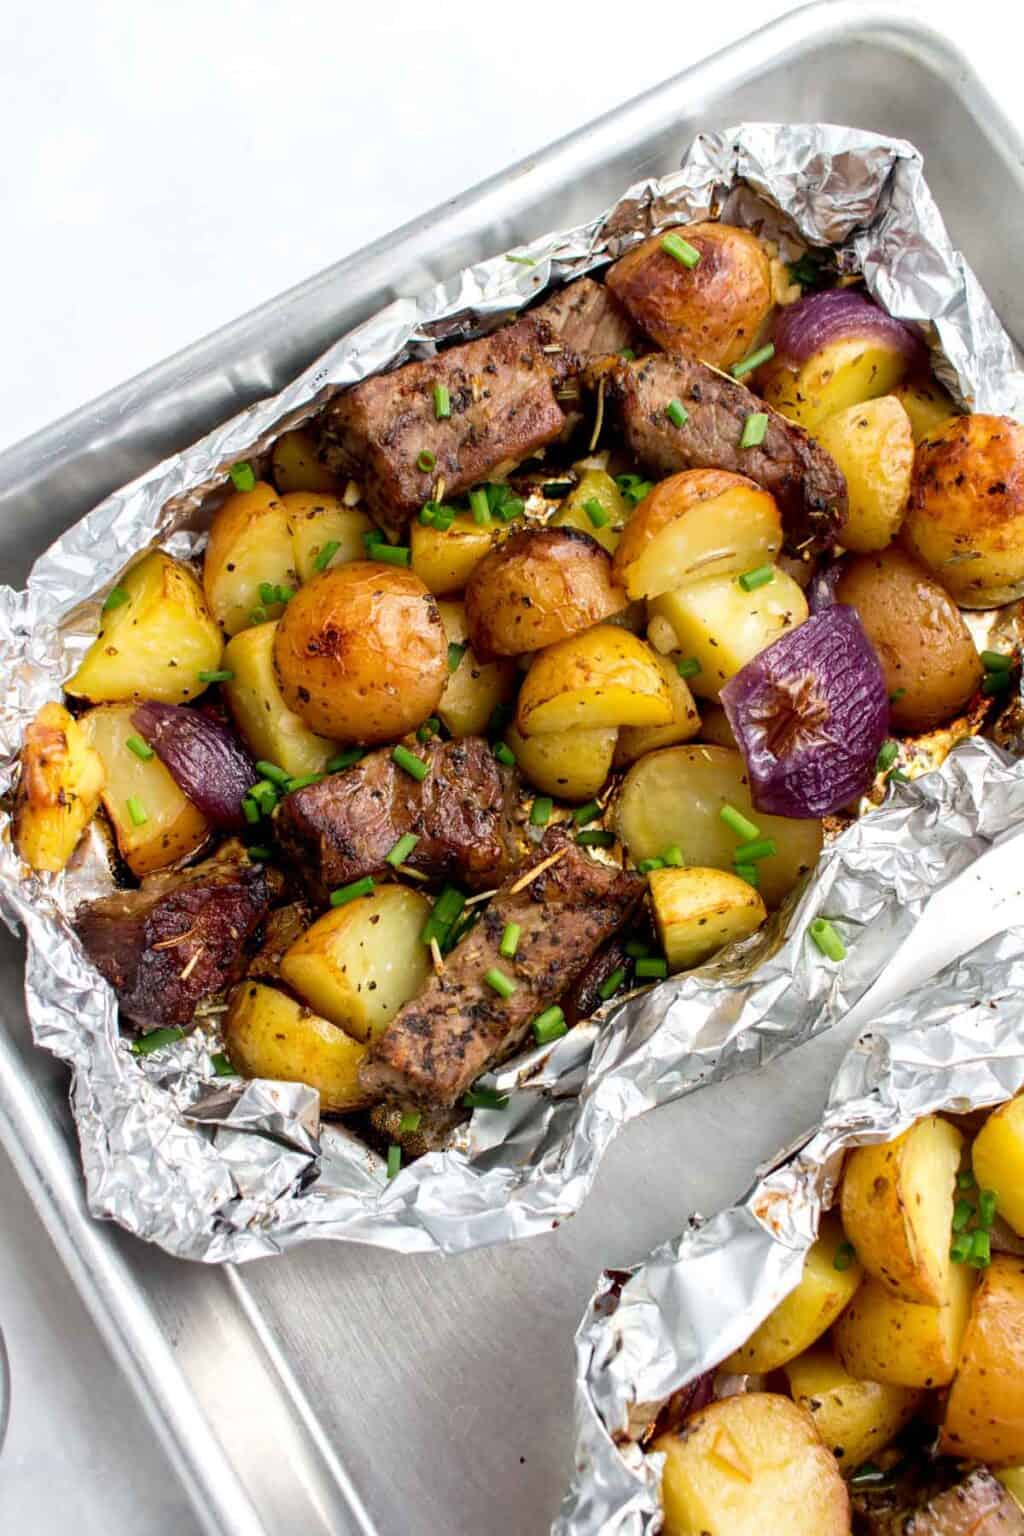 Steak and Potatoes in a Foil Pack - Carmy - Easy Healthy-ish Recipes